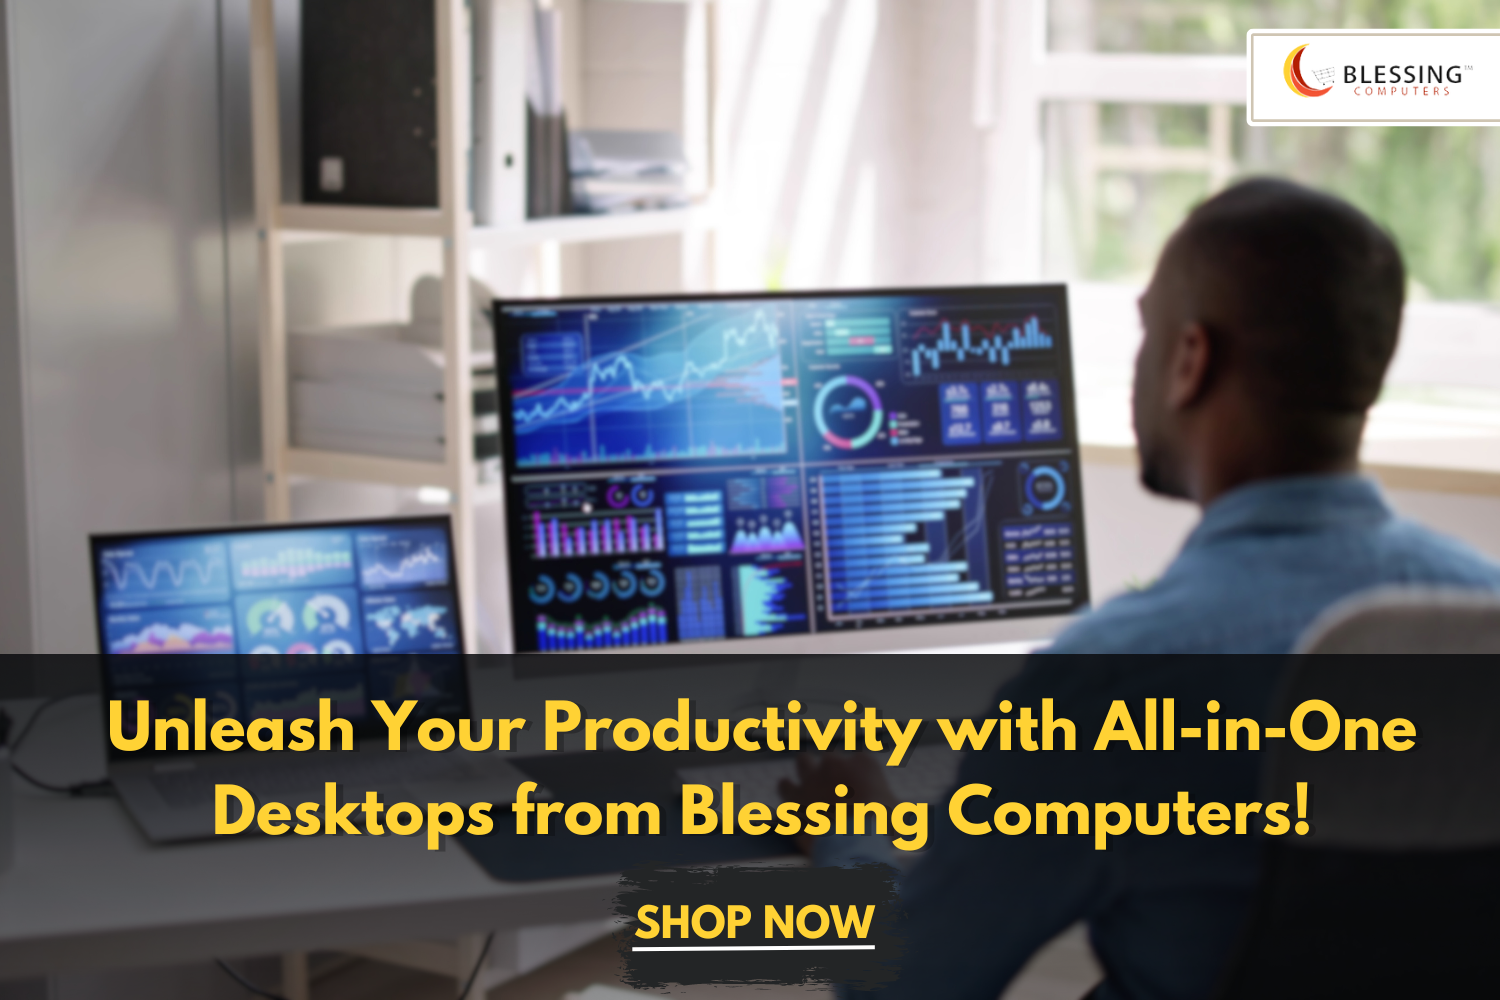 Unleash Your Productivity with All-in-One Desktops from Blessing Computers!